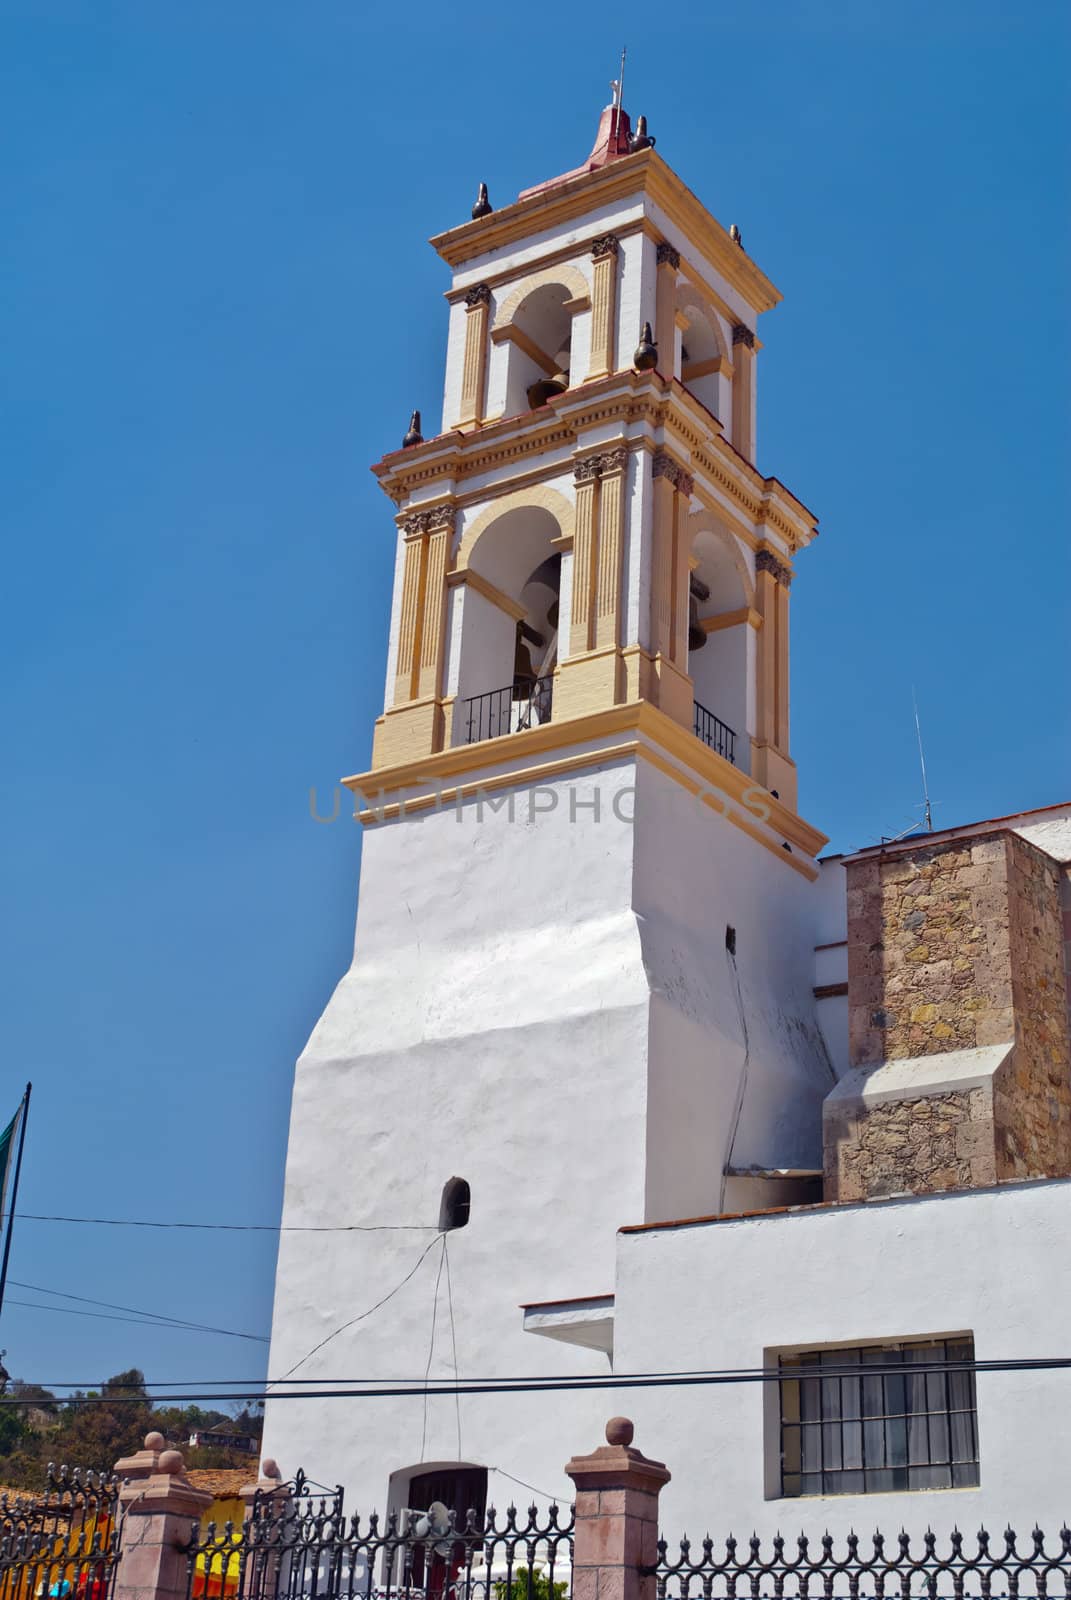 Catholic Church in Mexico by Marcus